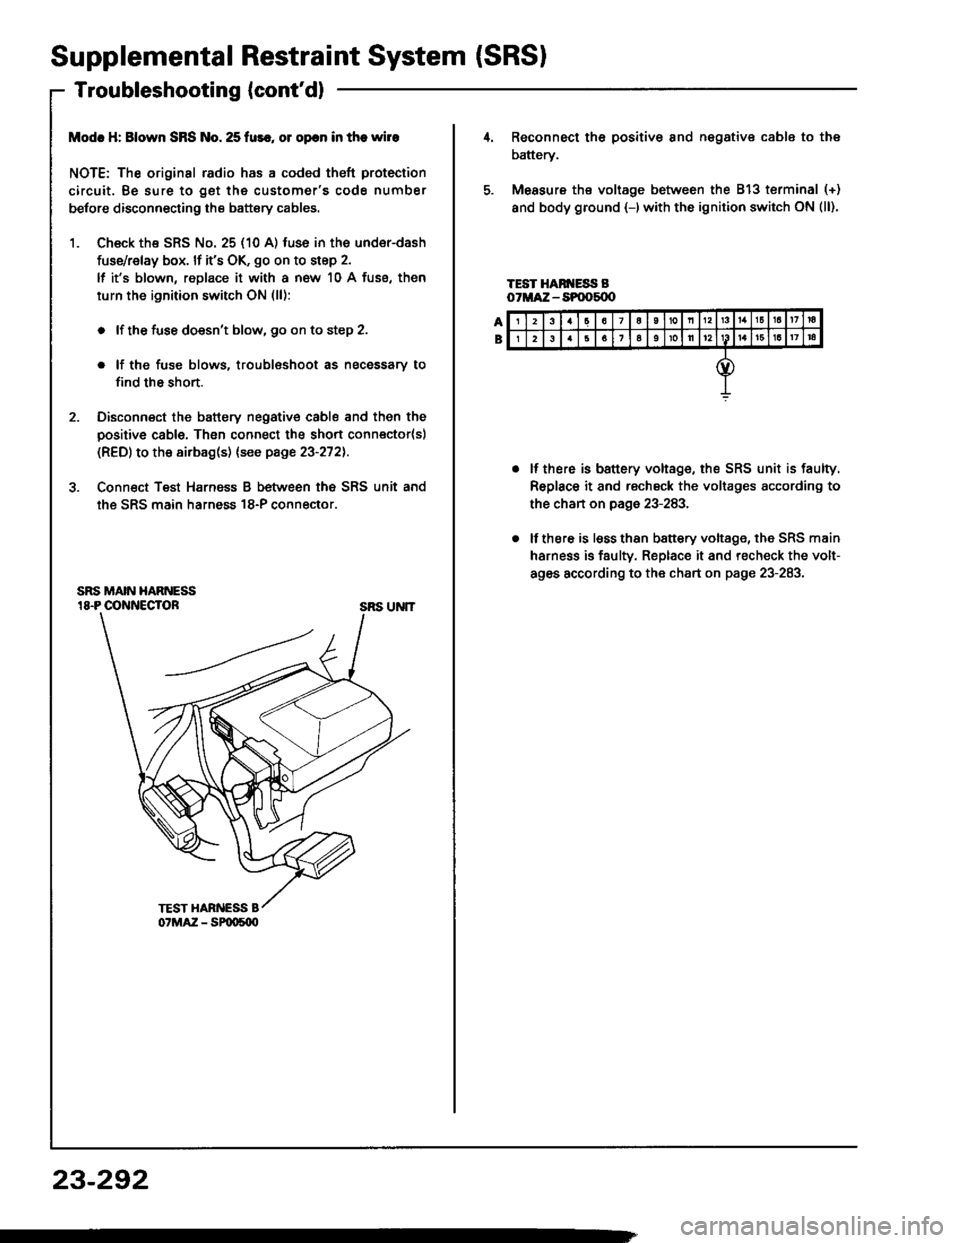 HONDA INTEGRA 1994 4.G Repair Manual Supplemental Restraint System (SRSI
Troubleshooting {contdl
Modc H: Blown SRS No. 25 fur., ol opcn in the wire
NOTE: The original radio has a coded theft protection
circuit. Be sure to get the custom